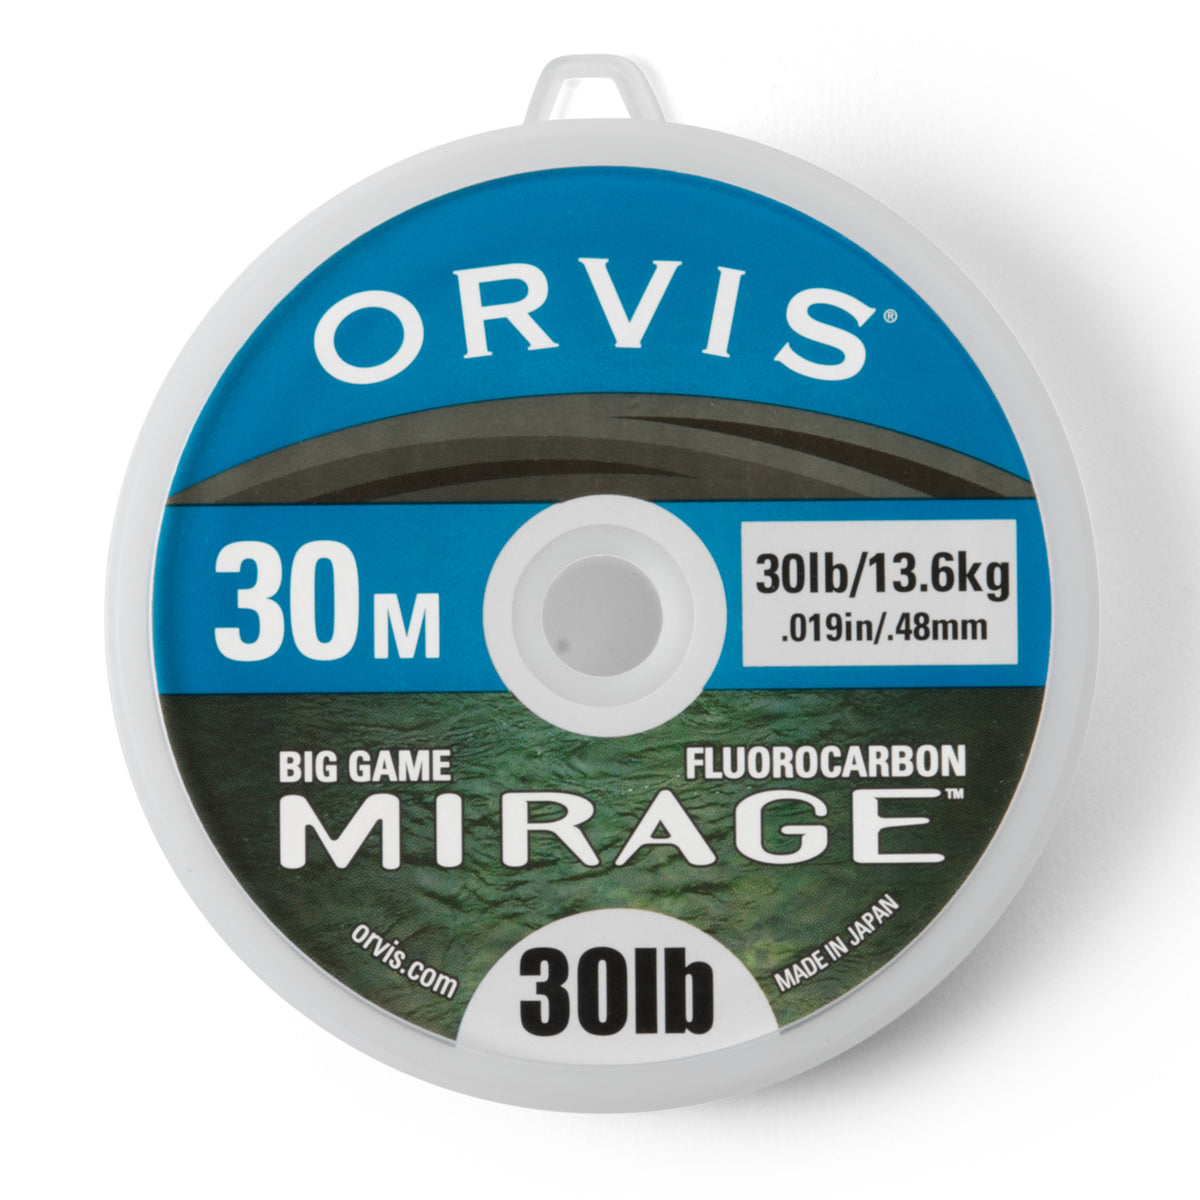 Mirage Tippet Material, Fly Fishing Gear